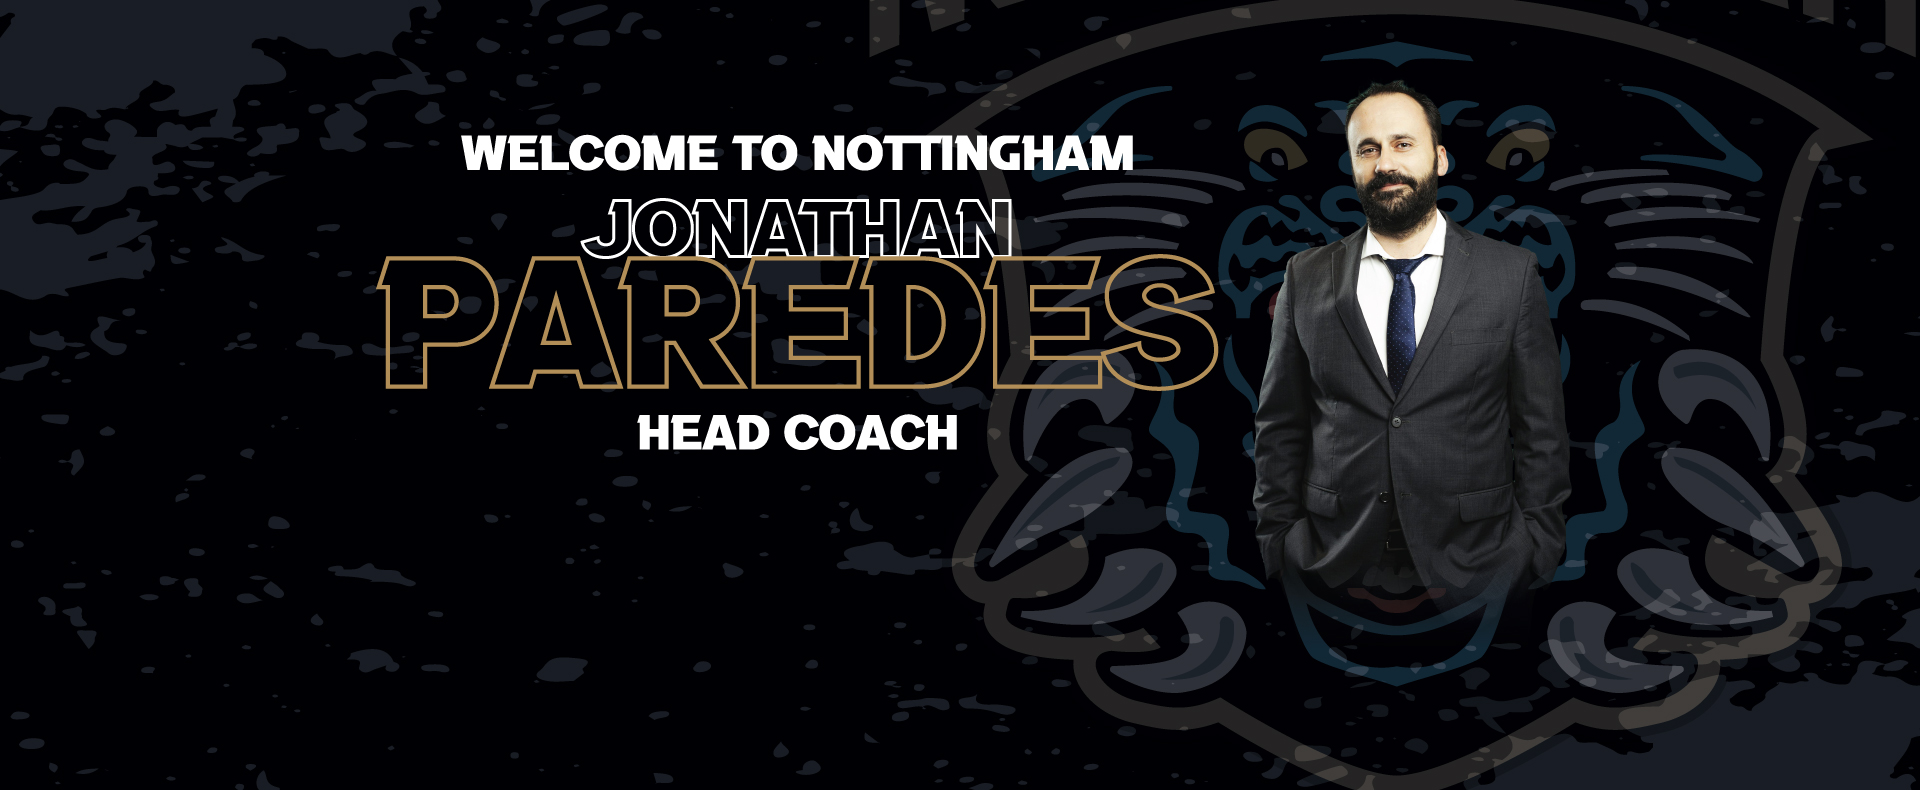 PANTHERS APPOINT PAREDES AS HEAD COACH Top Image